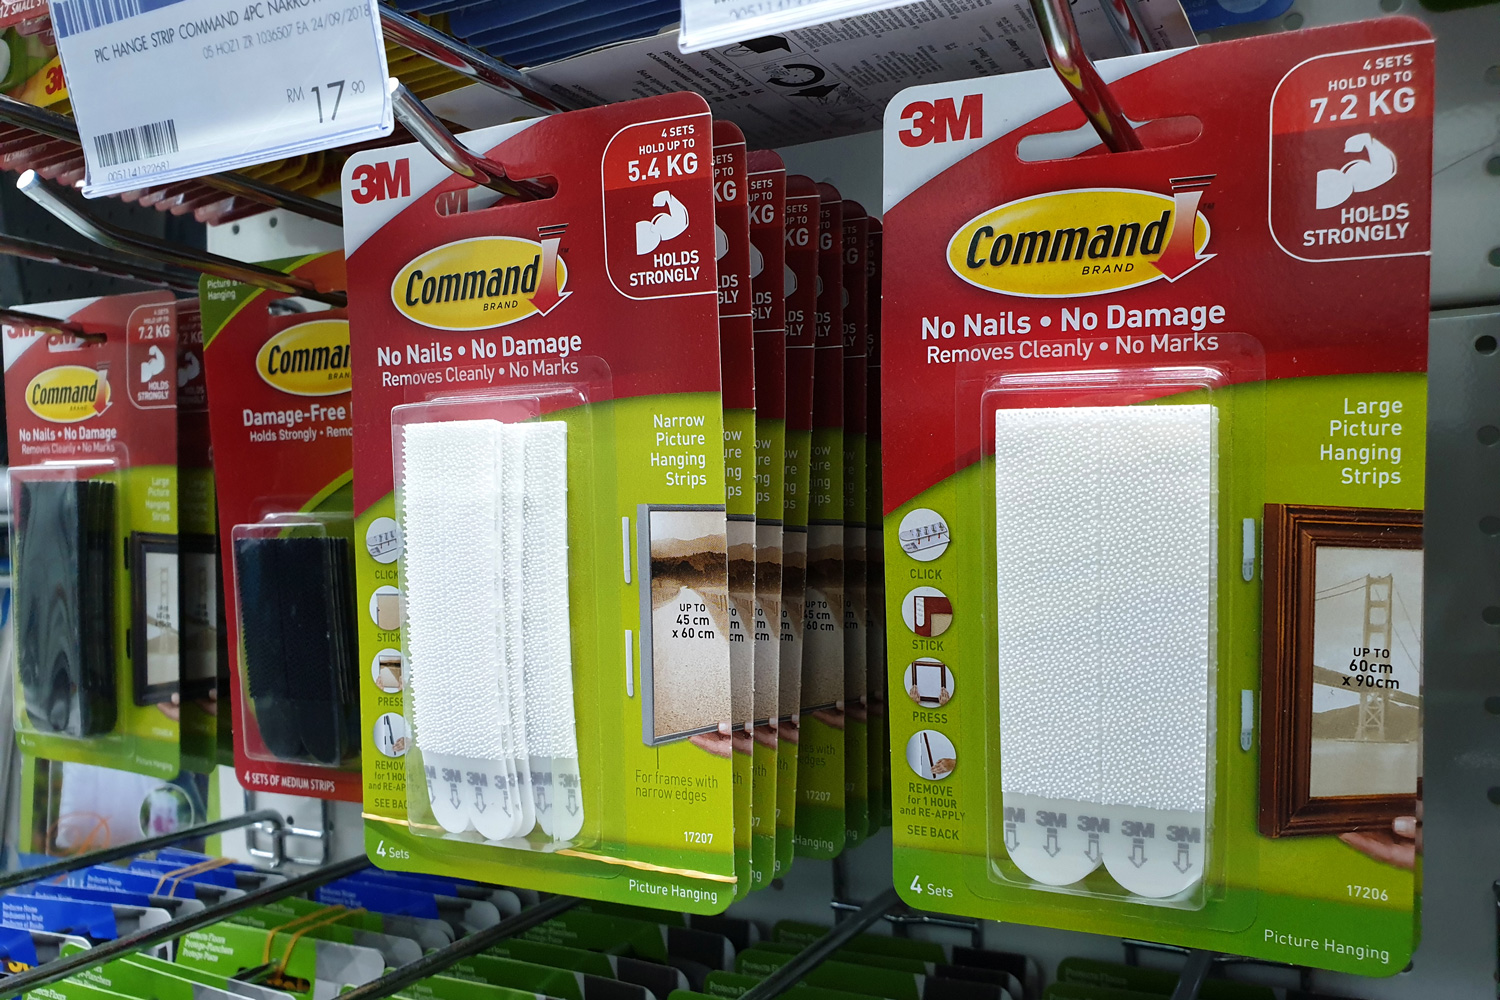 ommand brand Picture Hanging Strips and Hooks by 3M company on store shelf.